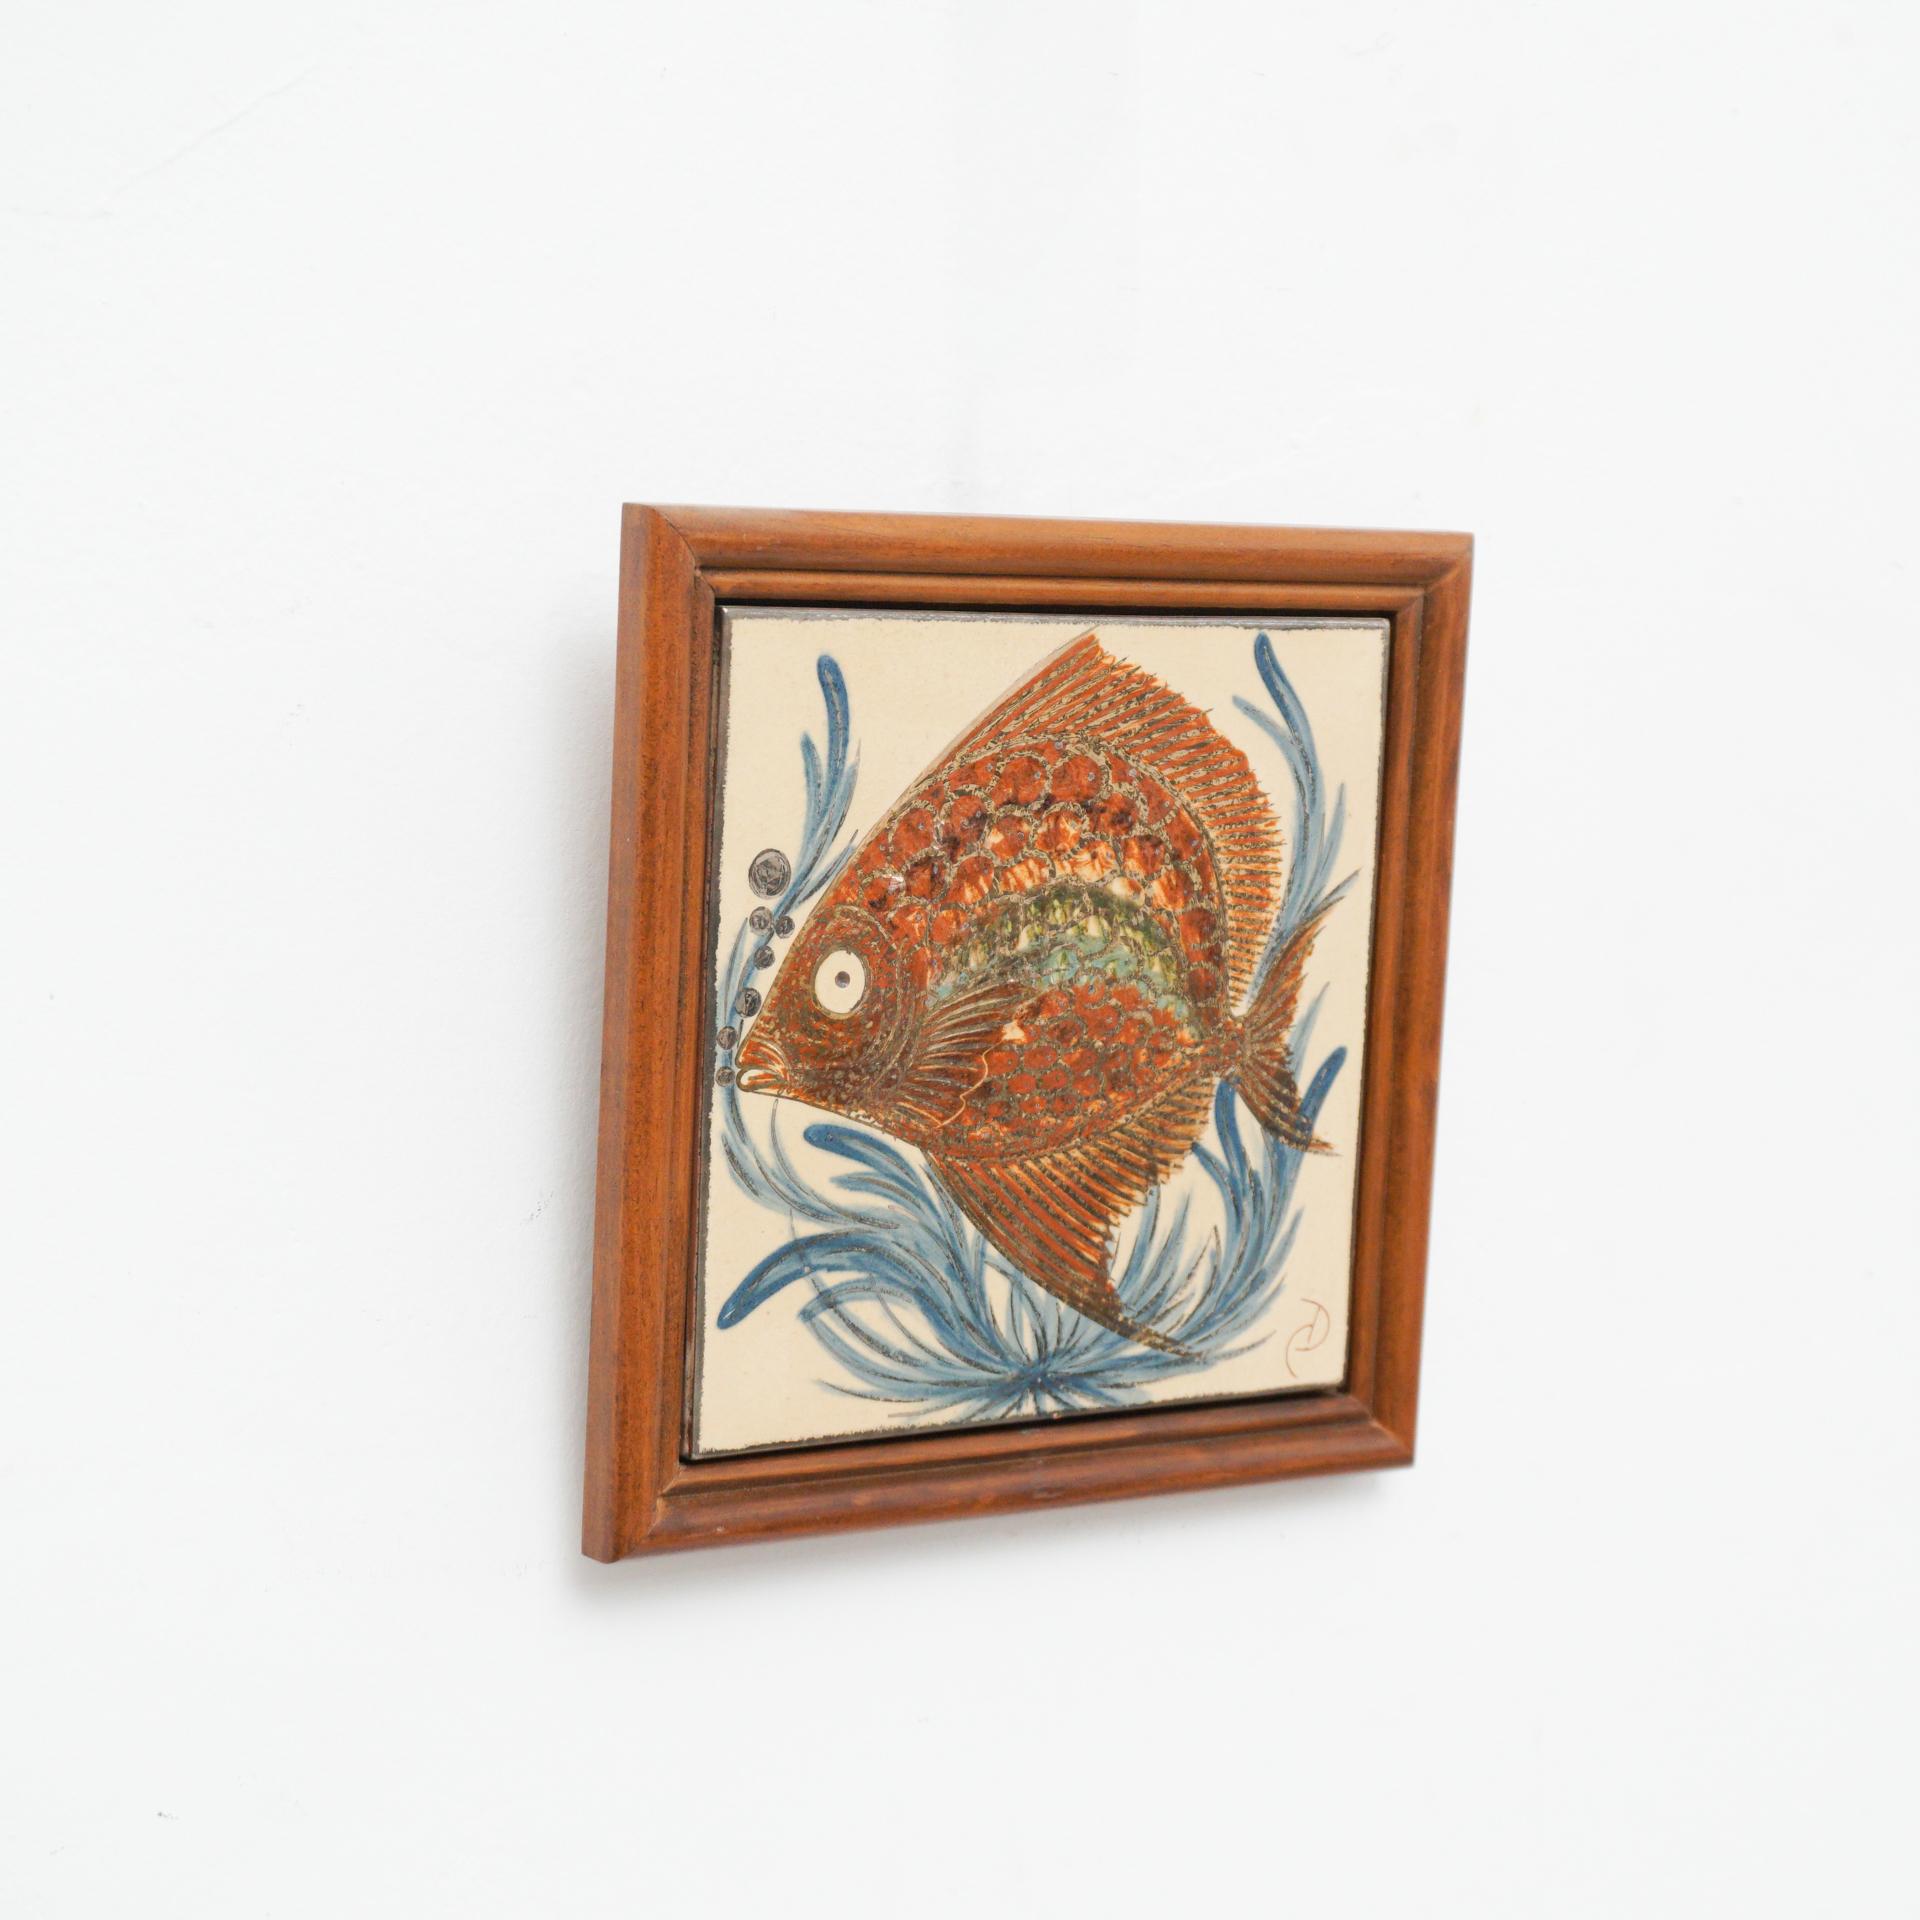 Ceramic hand painted Artwork of a fish by Catalan artist Diaz COSTA, circa 1960.
Framed. Signed.

In original condition, with minor wear consistent of age and use, preserving a beautiul patina.